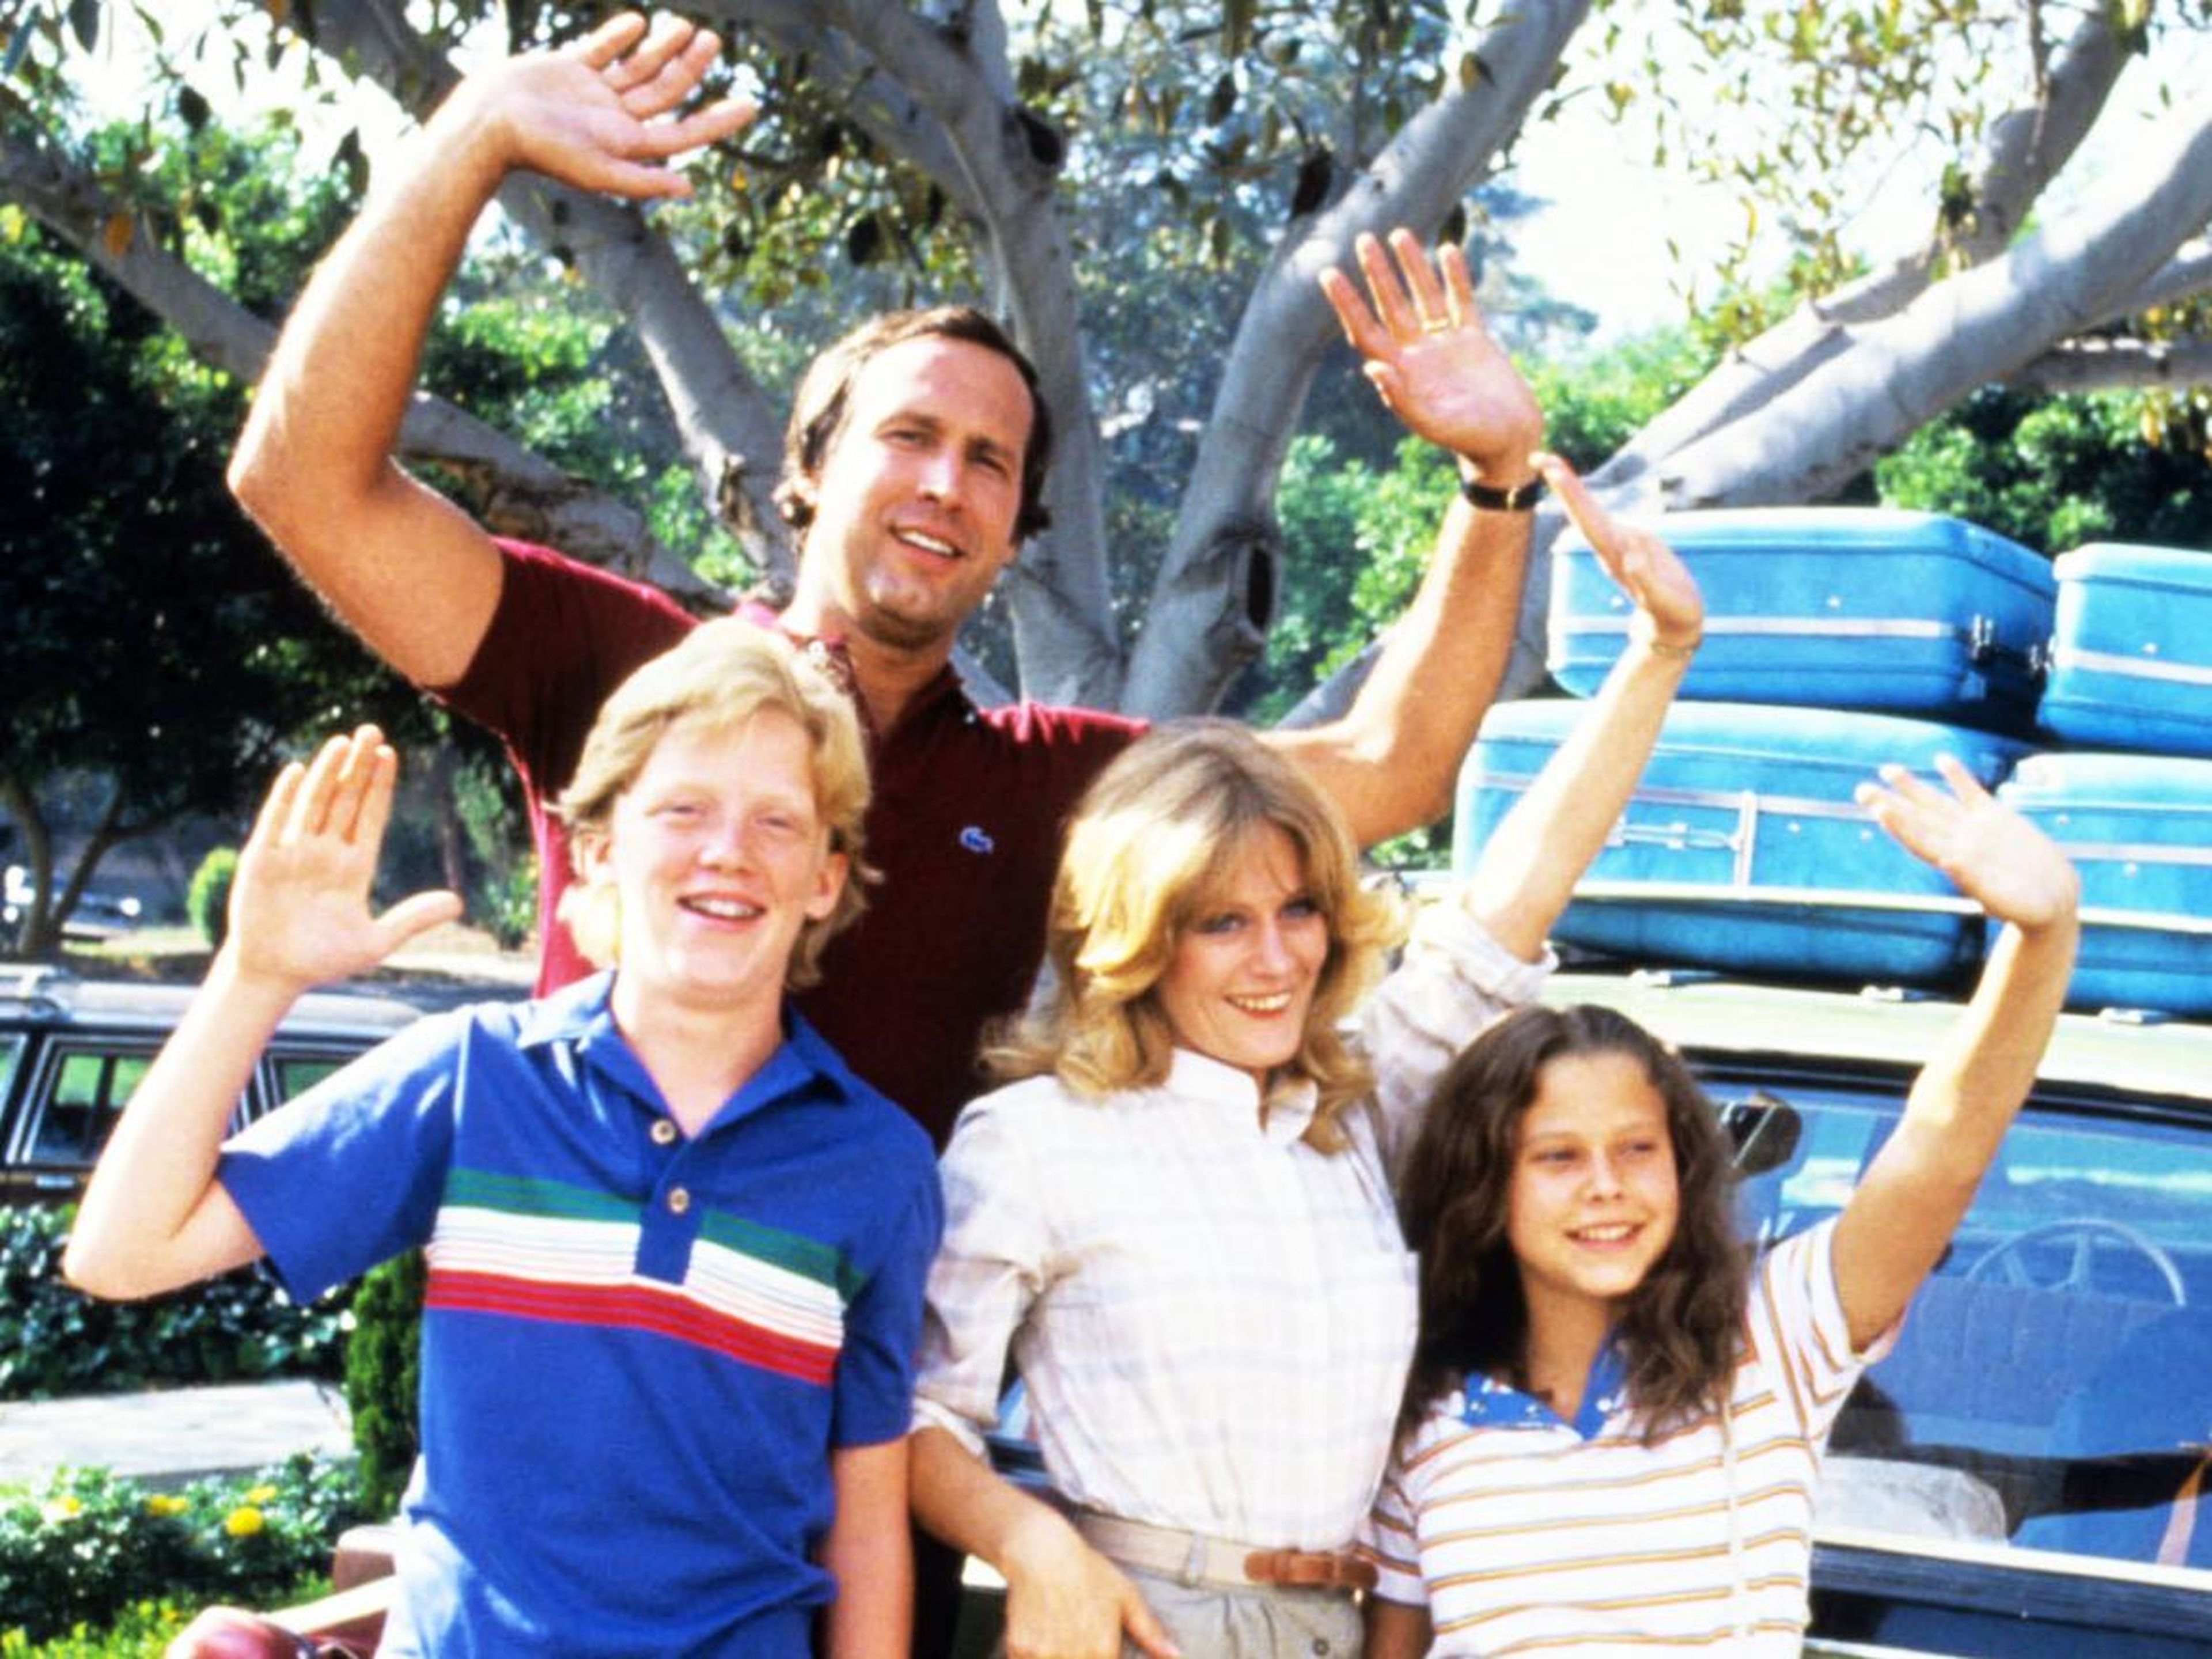 “National Lampoon’s Vacation” (1983)